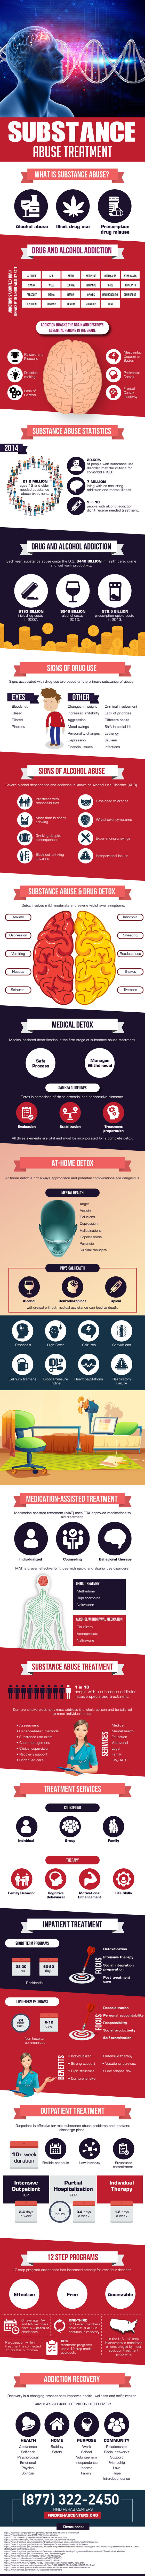 substance abuse infographic